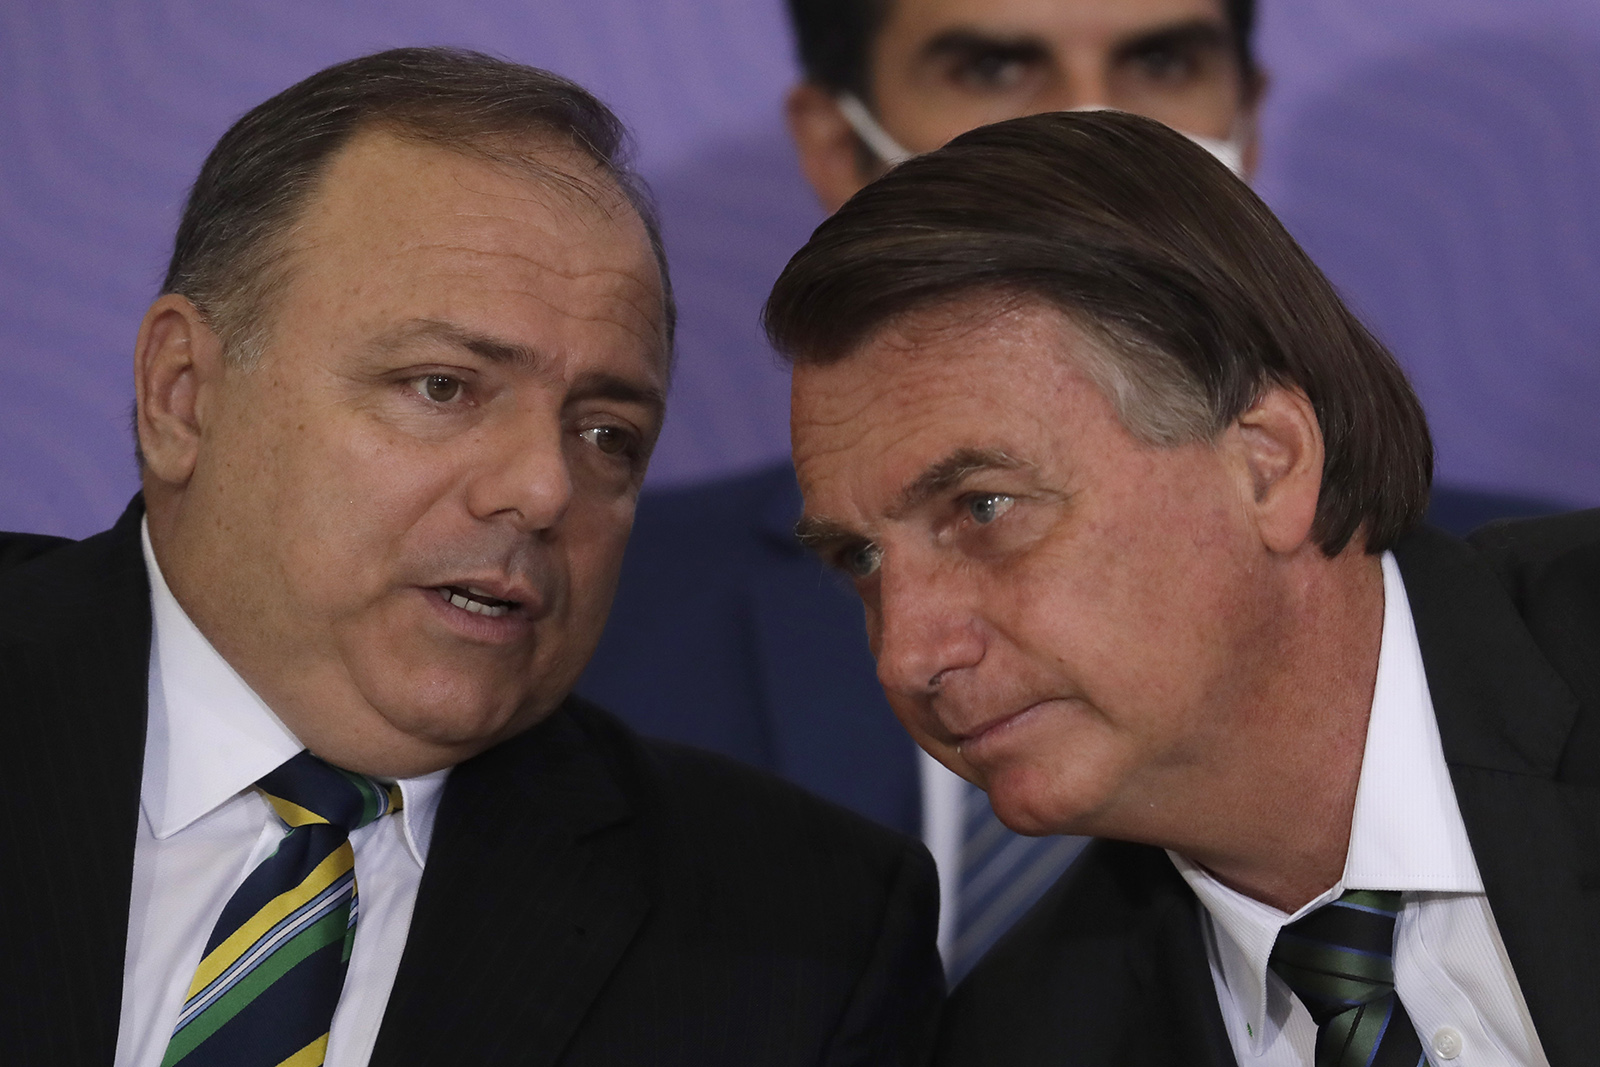 Brazilan President Jair Bolsonaro, right, talks with his Health Minister Eduardo Pazuello during a ceremony presenting Brazil's National Vaccination Plan Against Covid-19 at Planalto presidential palace in Brasilia, Brazil, on Wednesday, December 16.